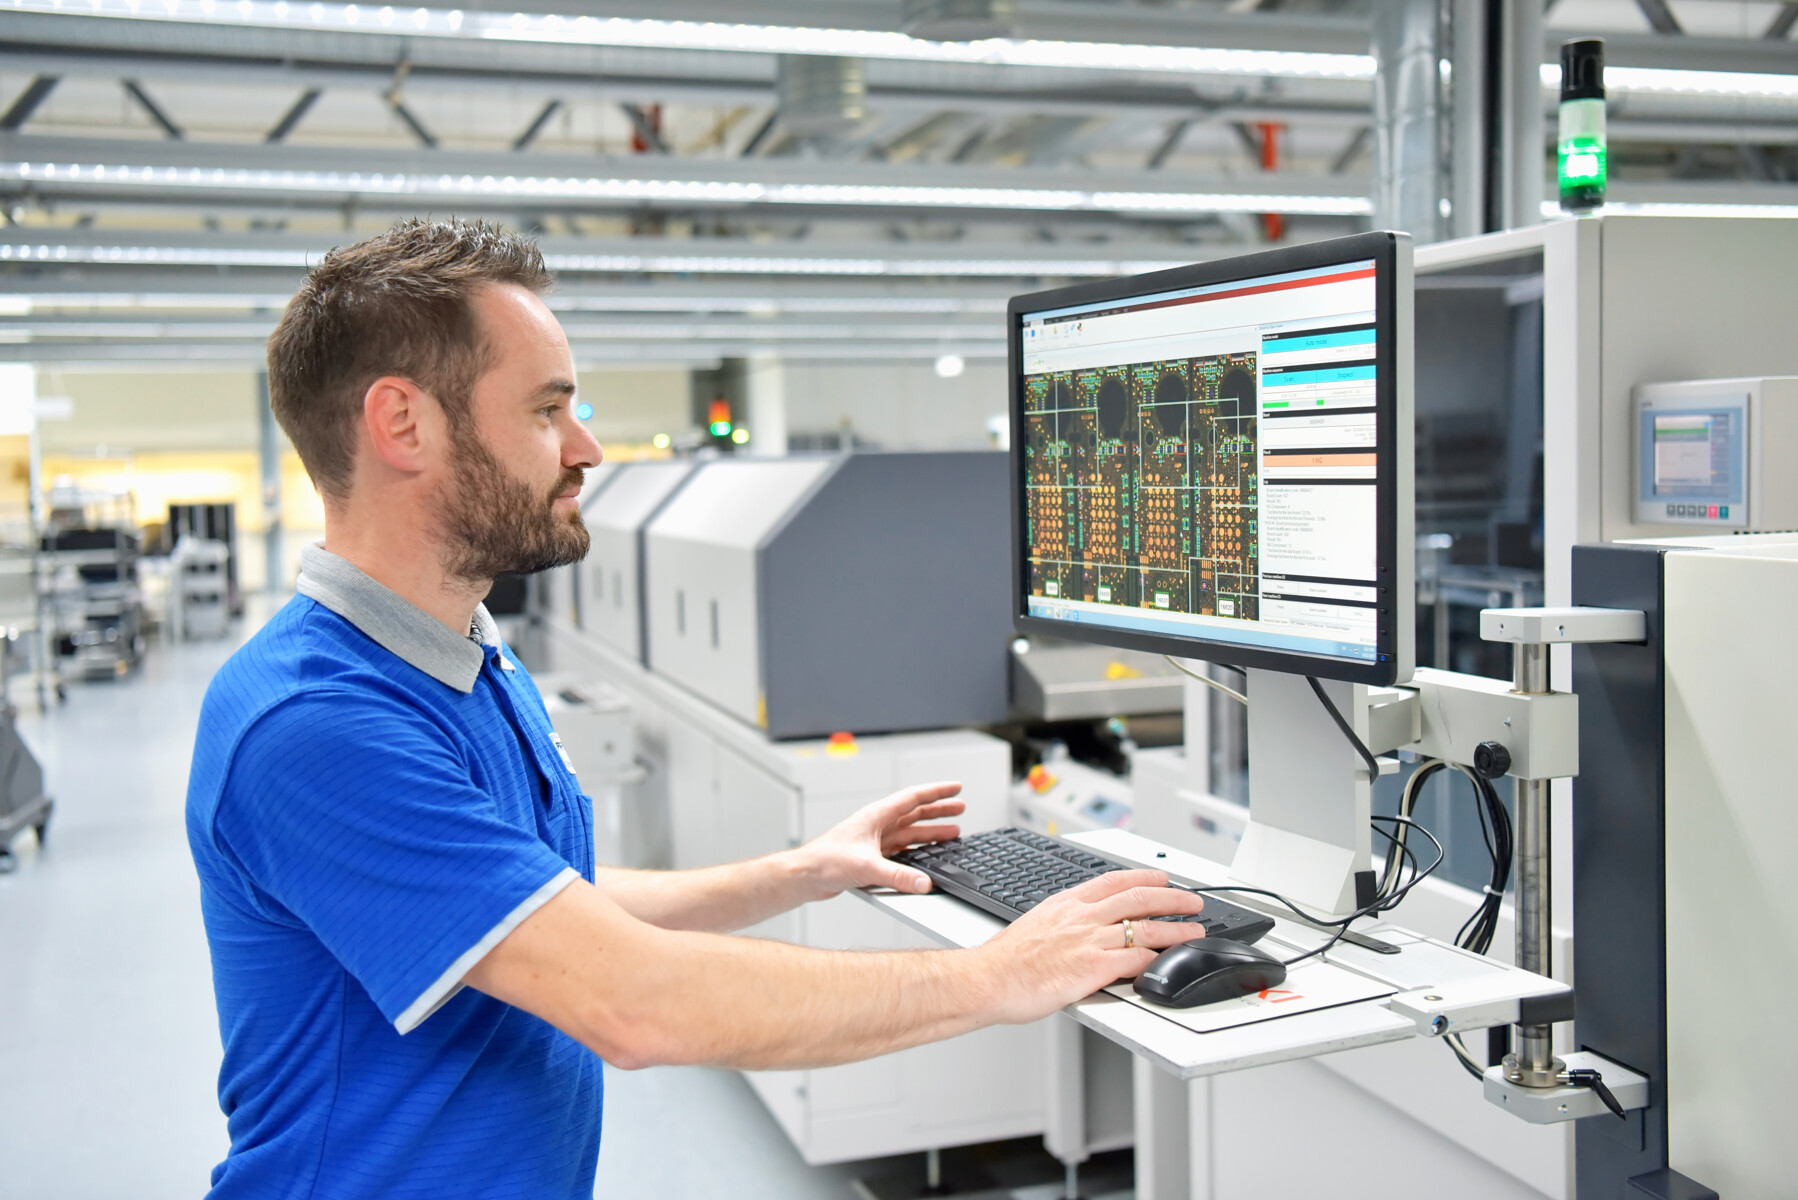  Example for IIoT: A smart monitoring system for a production plant